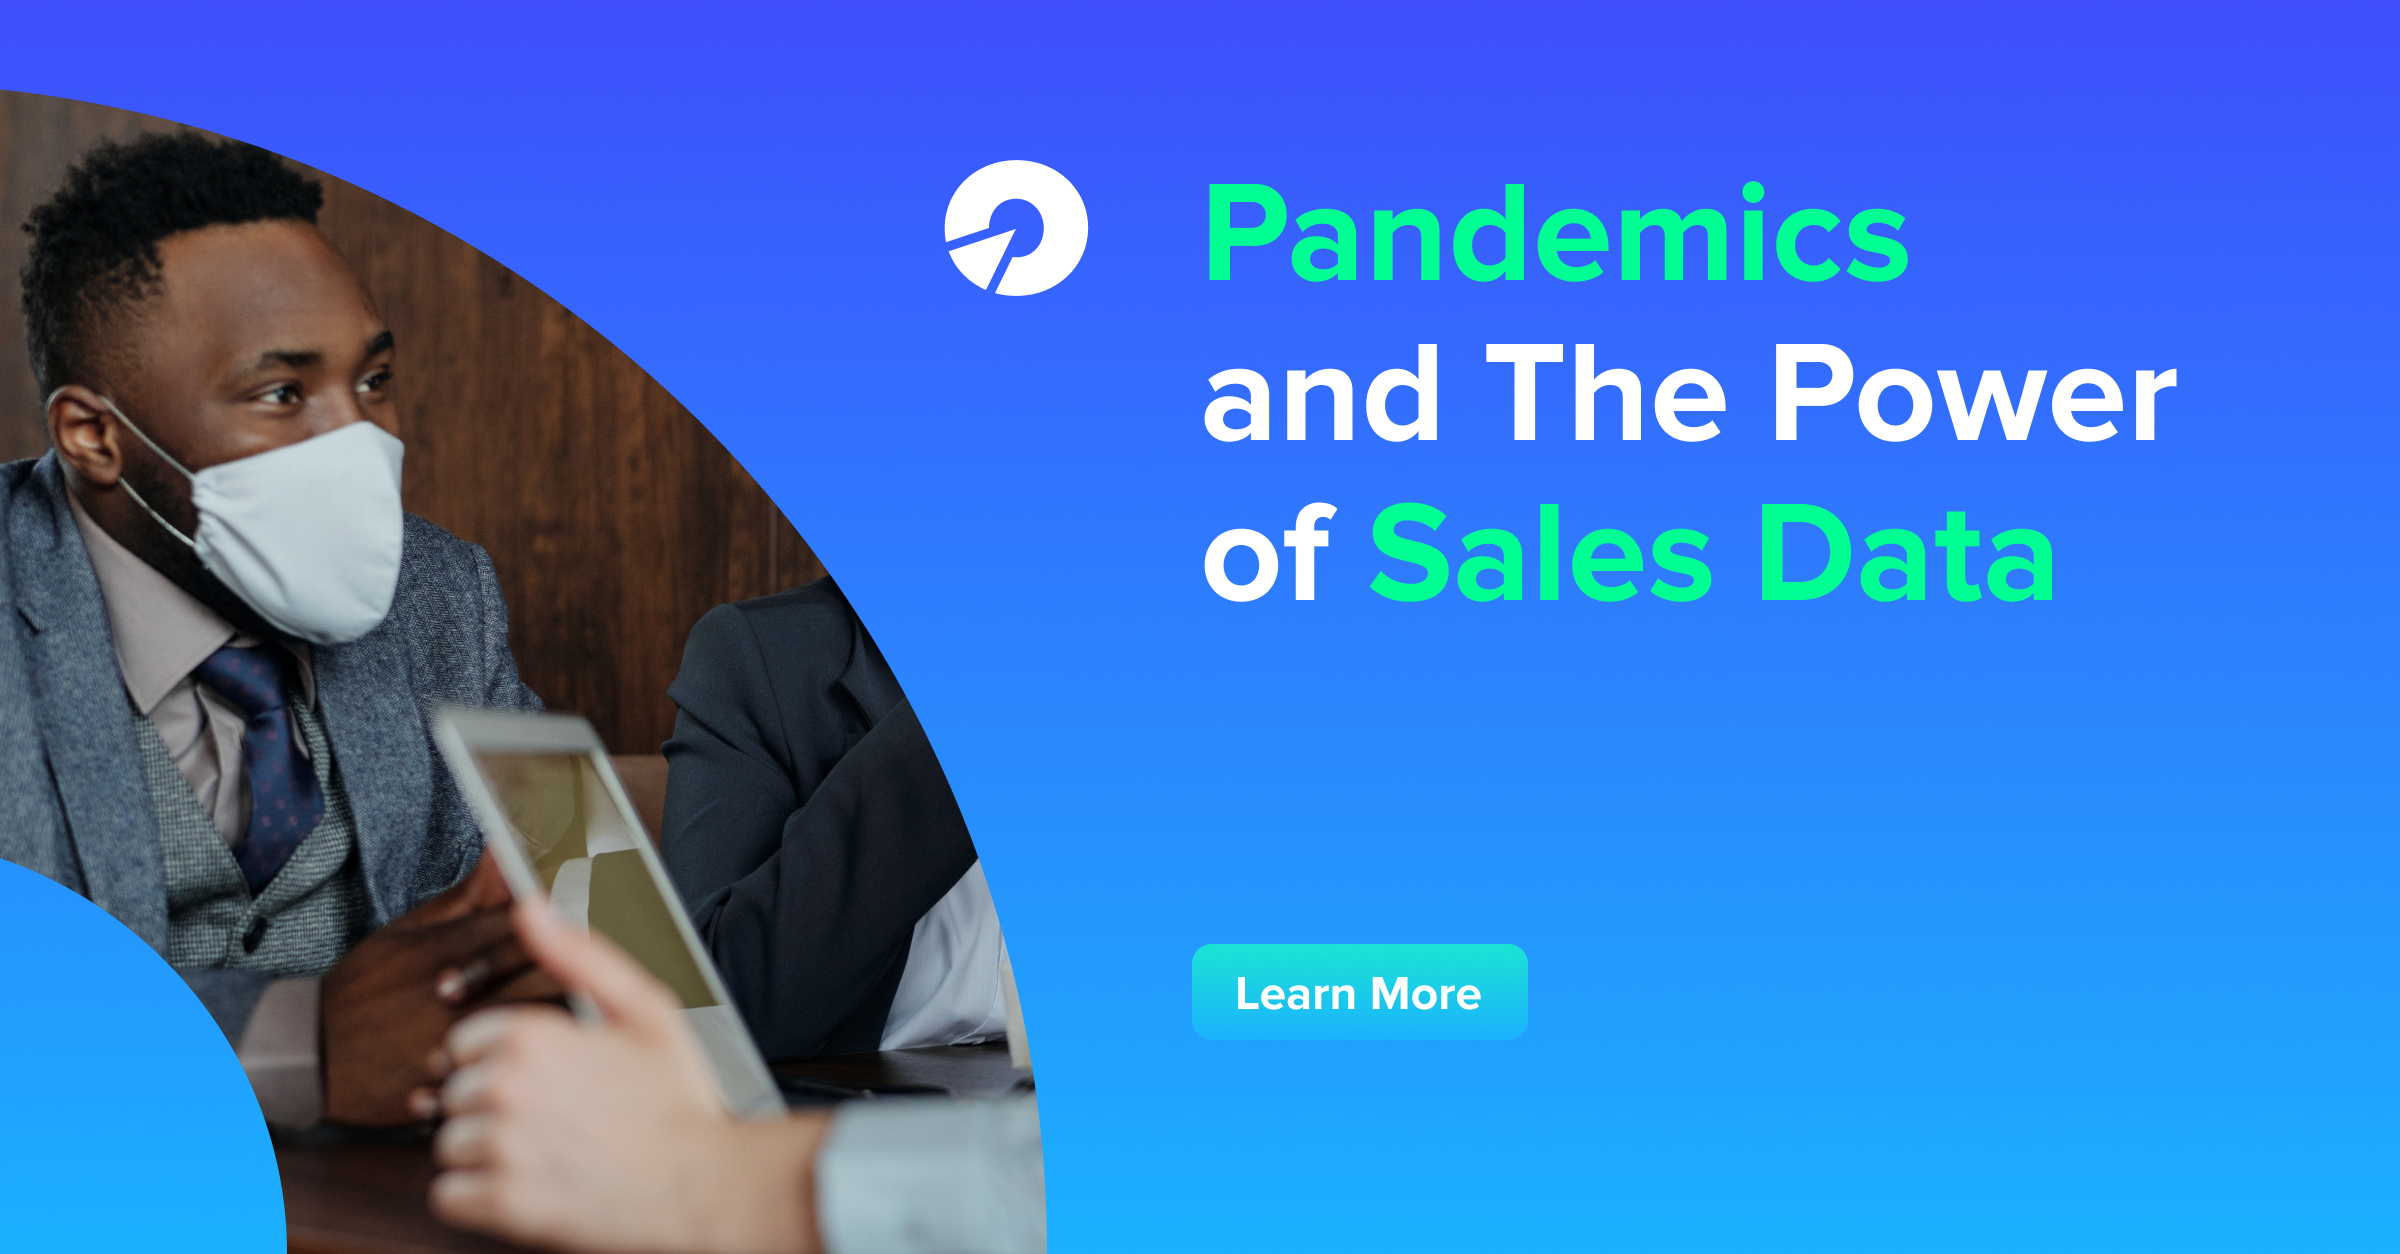 Pandemics and The Power of Sales Data